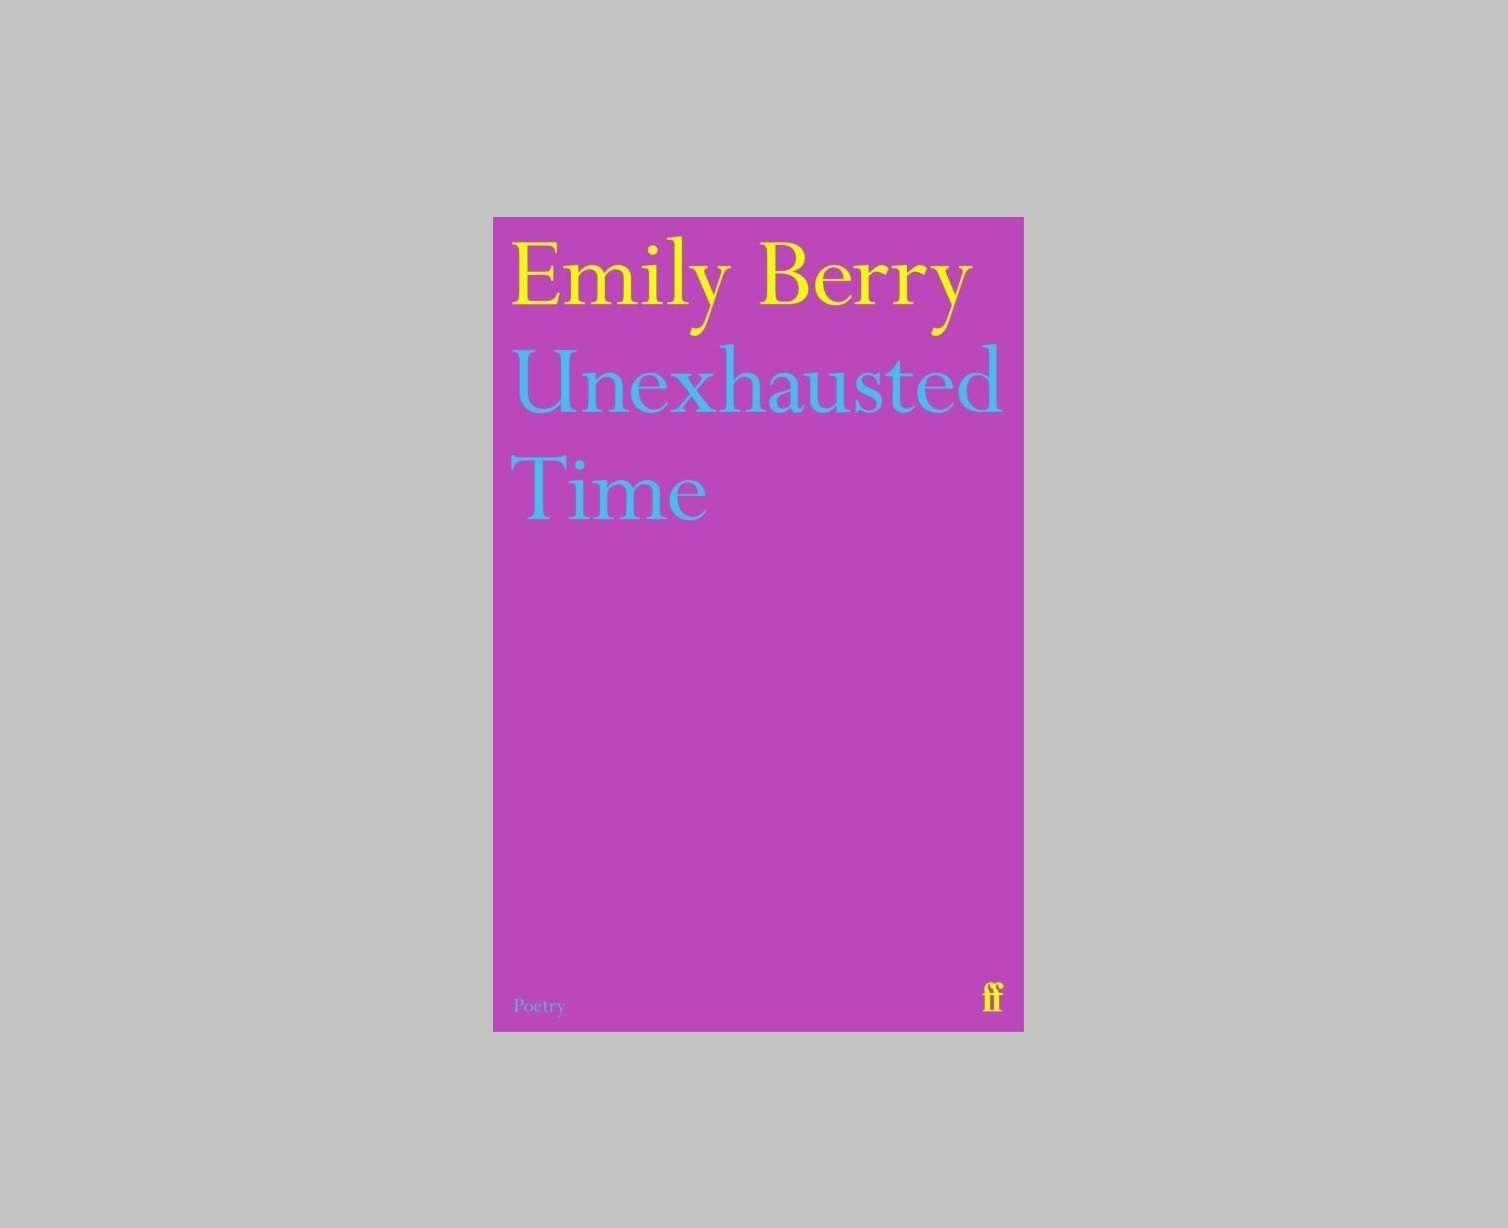 ‘All our past lives’: on Emily Berry’s ‘Unexhausted Time’